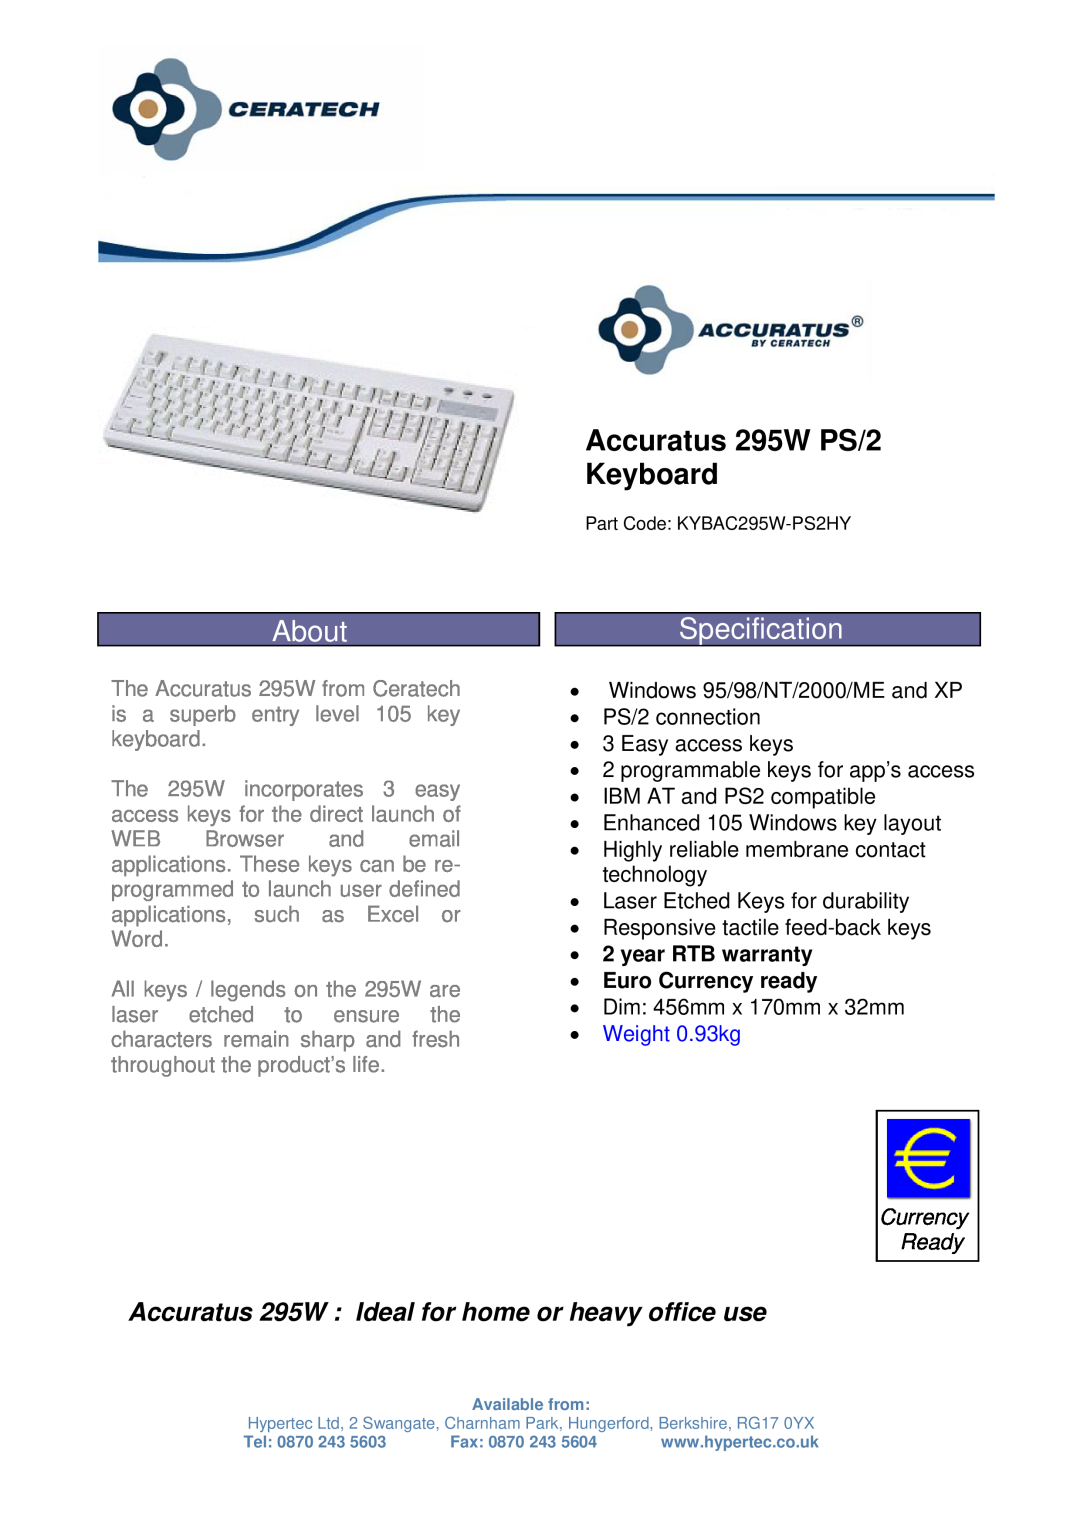 Hypertec warranty About, Accuratus 295W PS/2 Keyboard, Specification, Accuratus 295W Ideal for home or heavy office use 